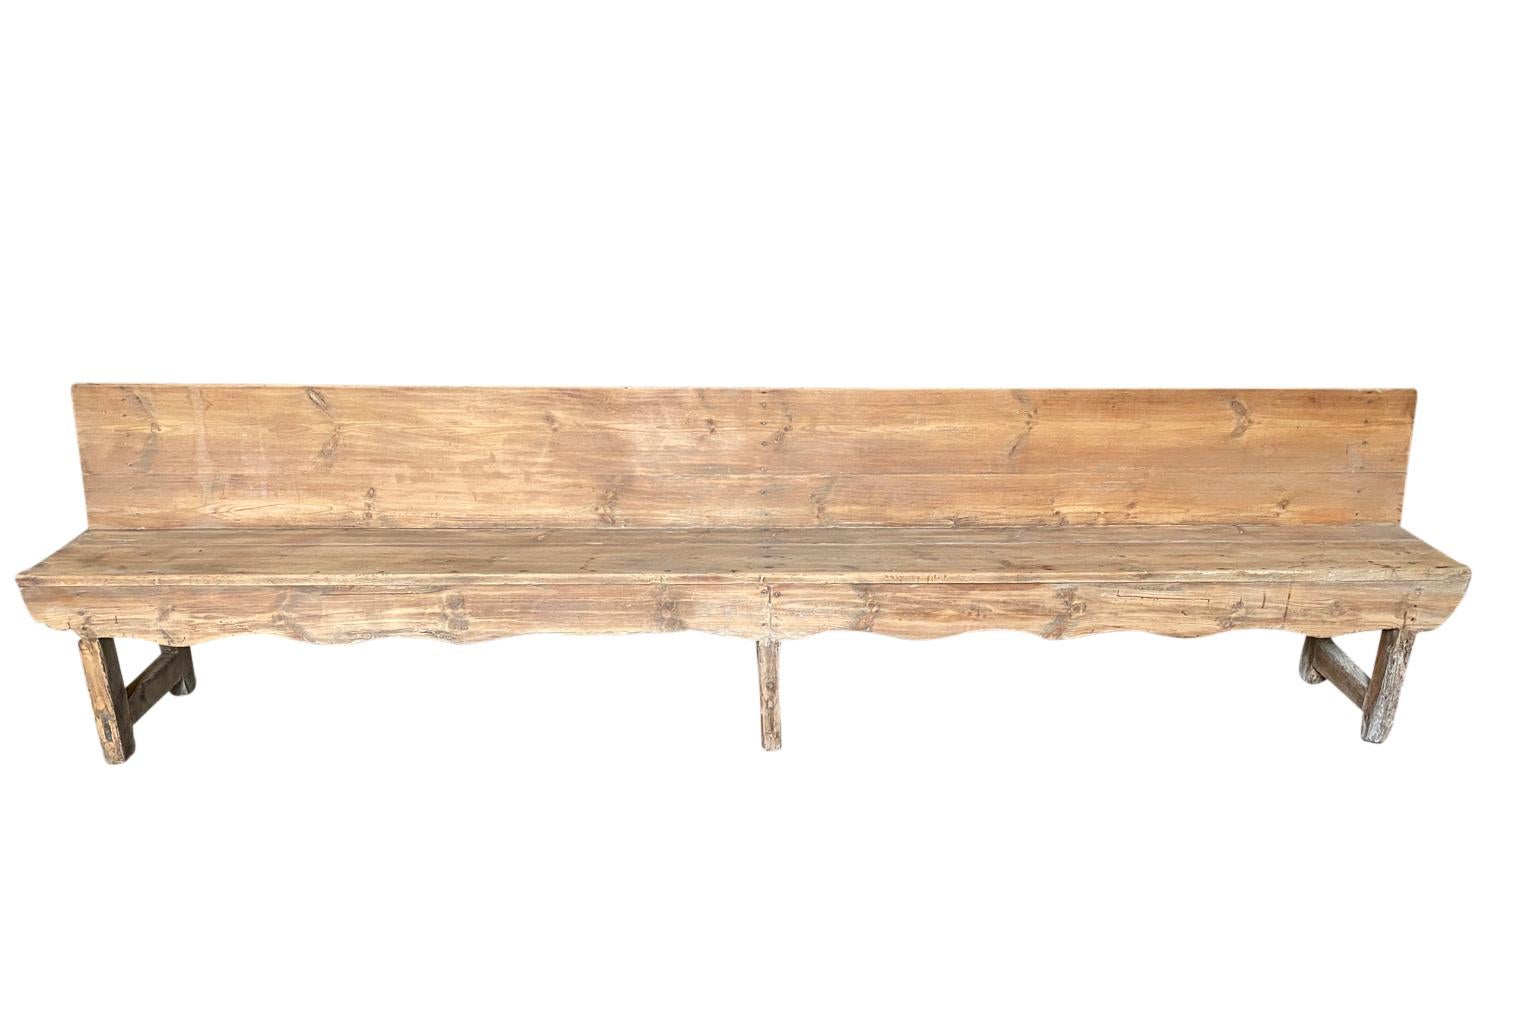 A very handsome and grand scale mid-19th century primitive bench from the Catalan region of Spain. Soundly constructed from Meleze - a very hard pine. The seat height is 19 1/4